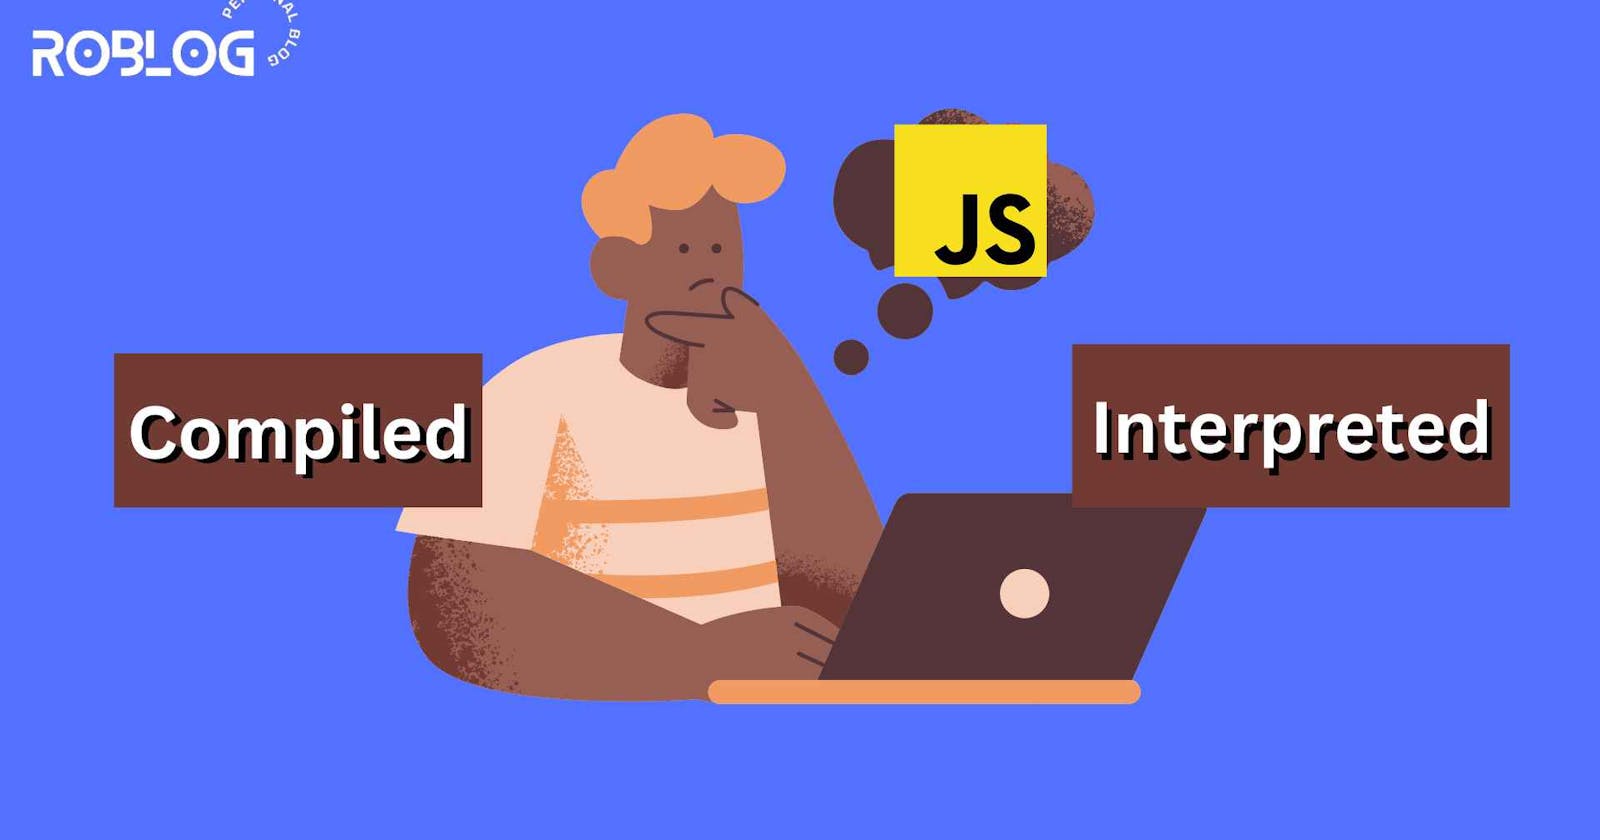 Is javascript compiled or interpreted language?